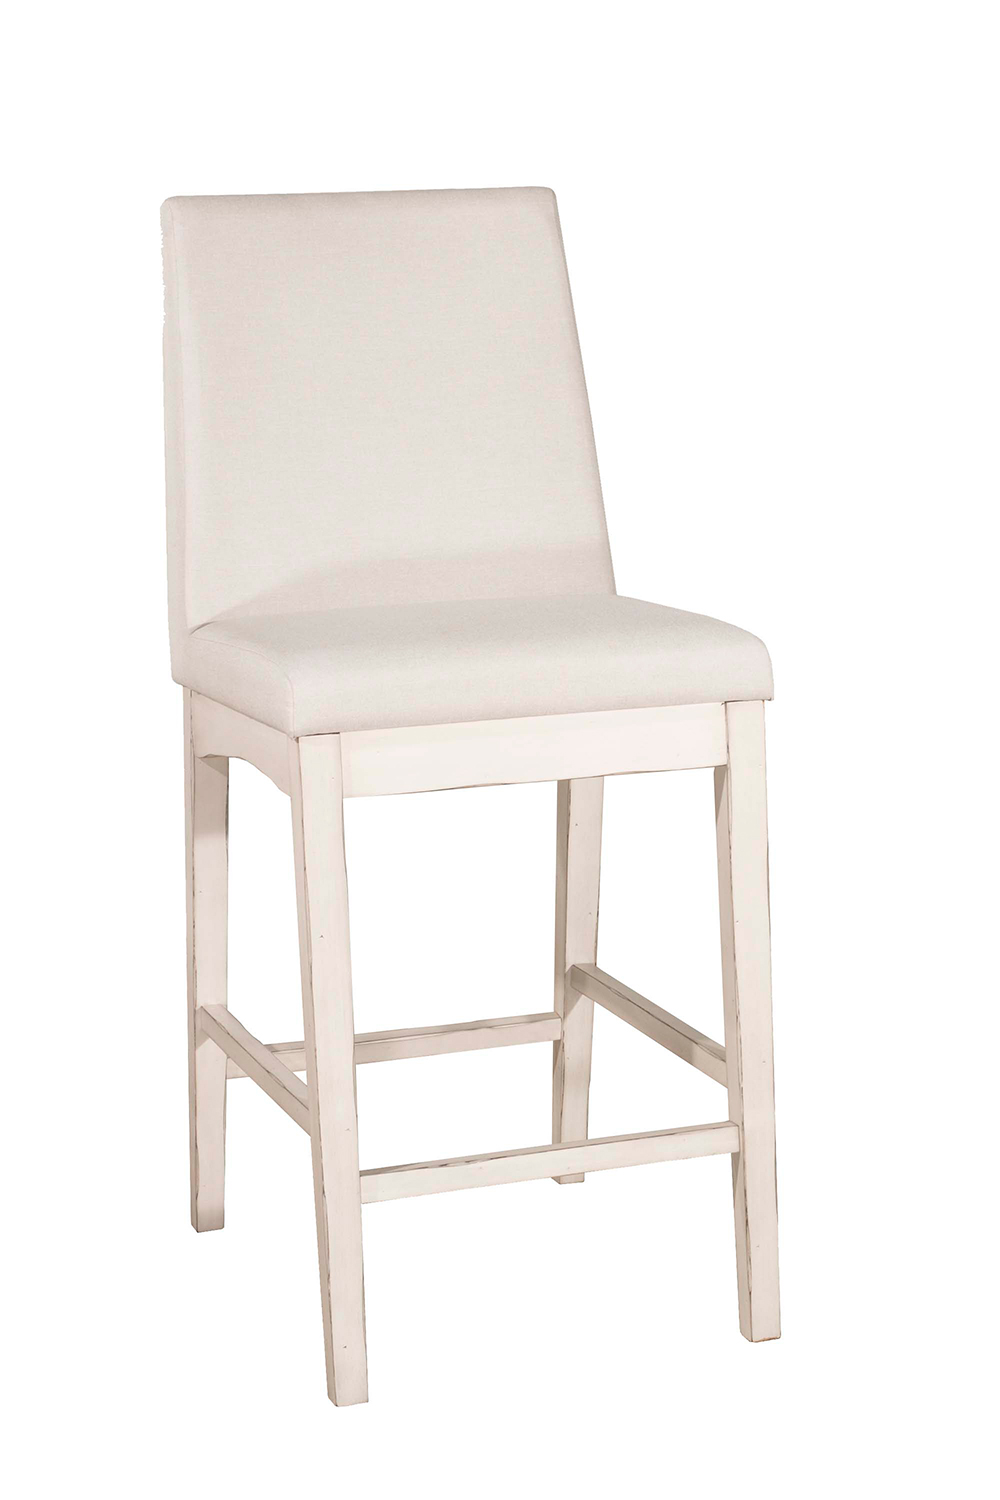 Hillsdale Clarion Non-Swivel Counter Height Stool - Sea White - Fog Fabric